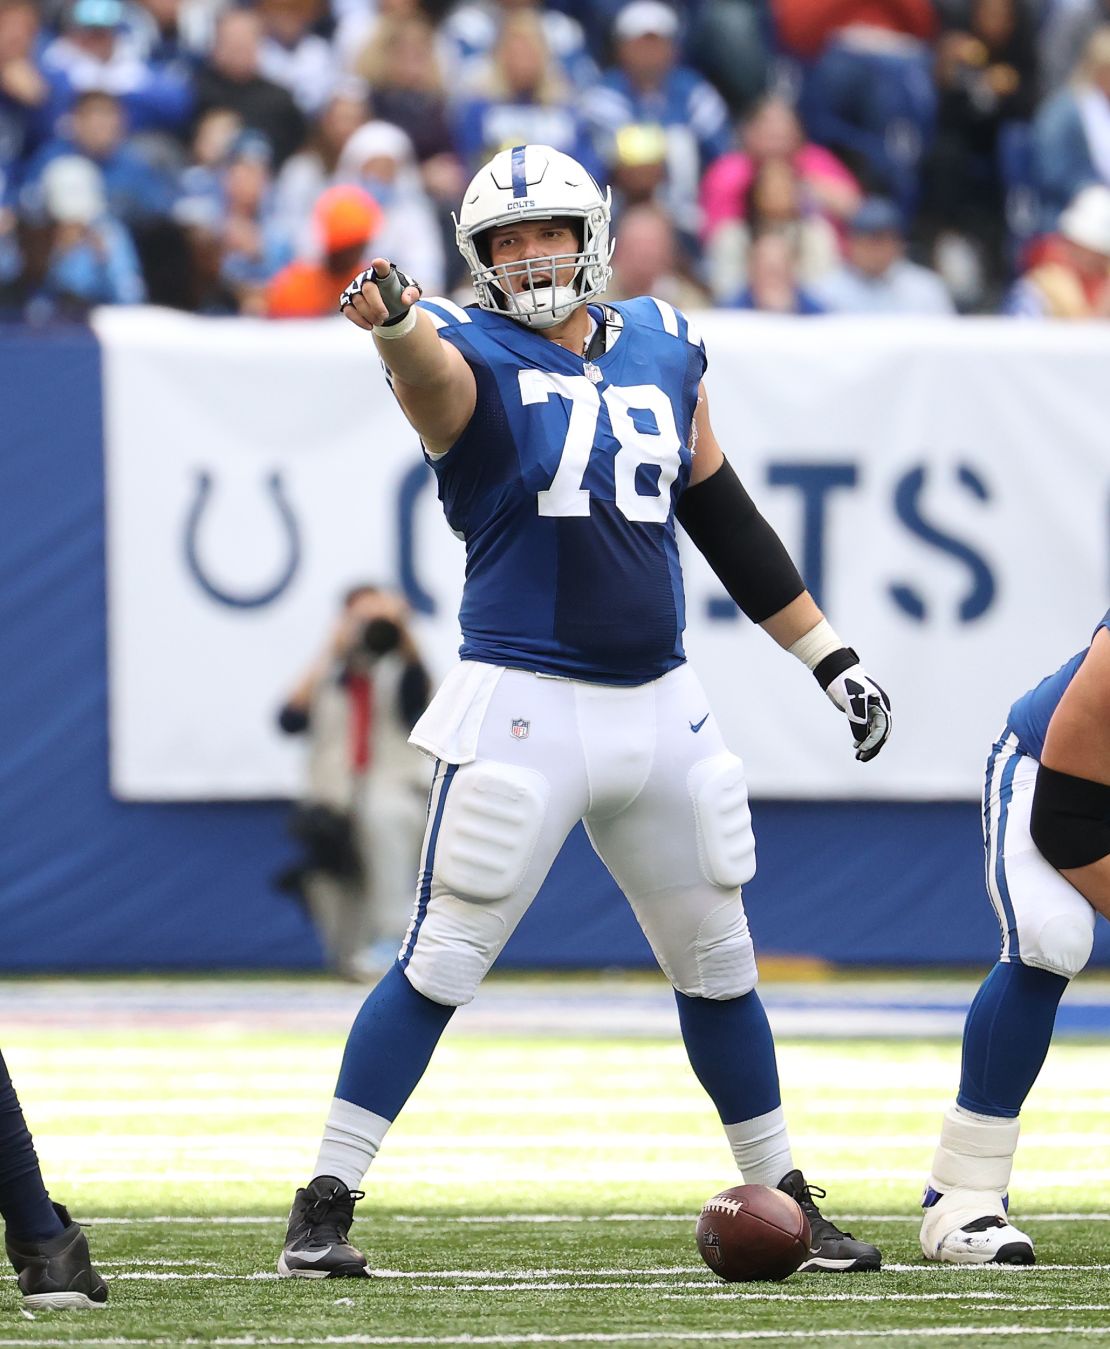 Ryan Kelly #78 of the Indianapolis Colts is pictured in action against the Tennessee Titans at Lucas Oil Stadium on October 31, 2021 in Indianapolis, Indiana.